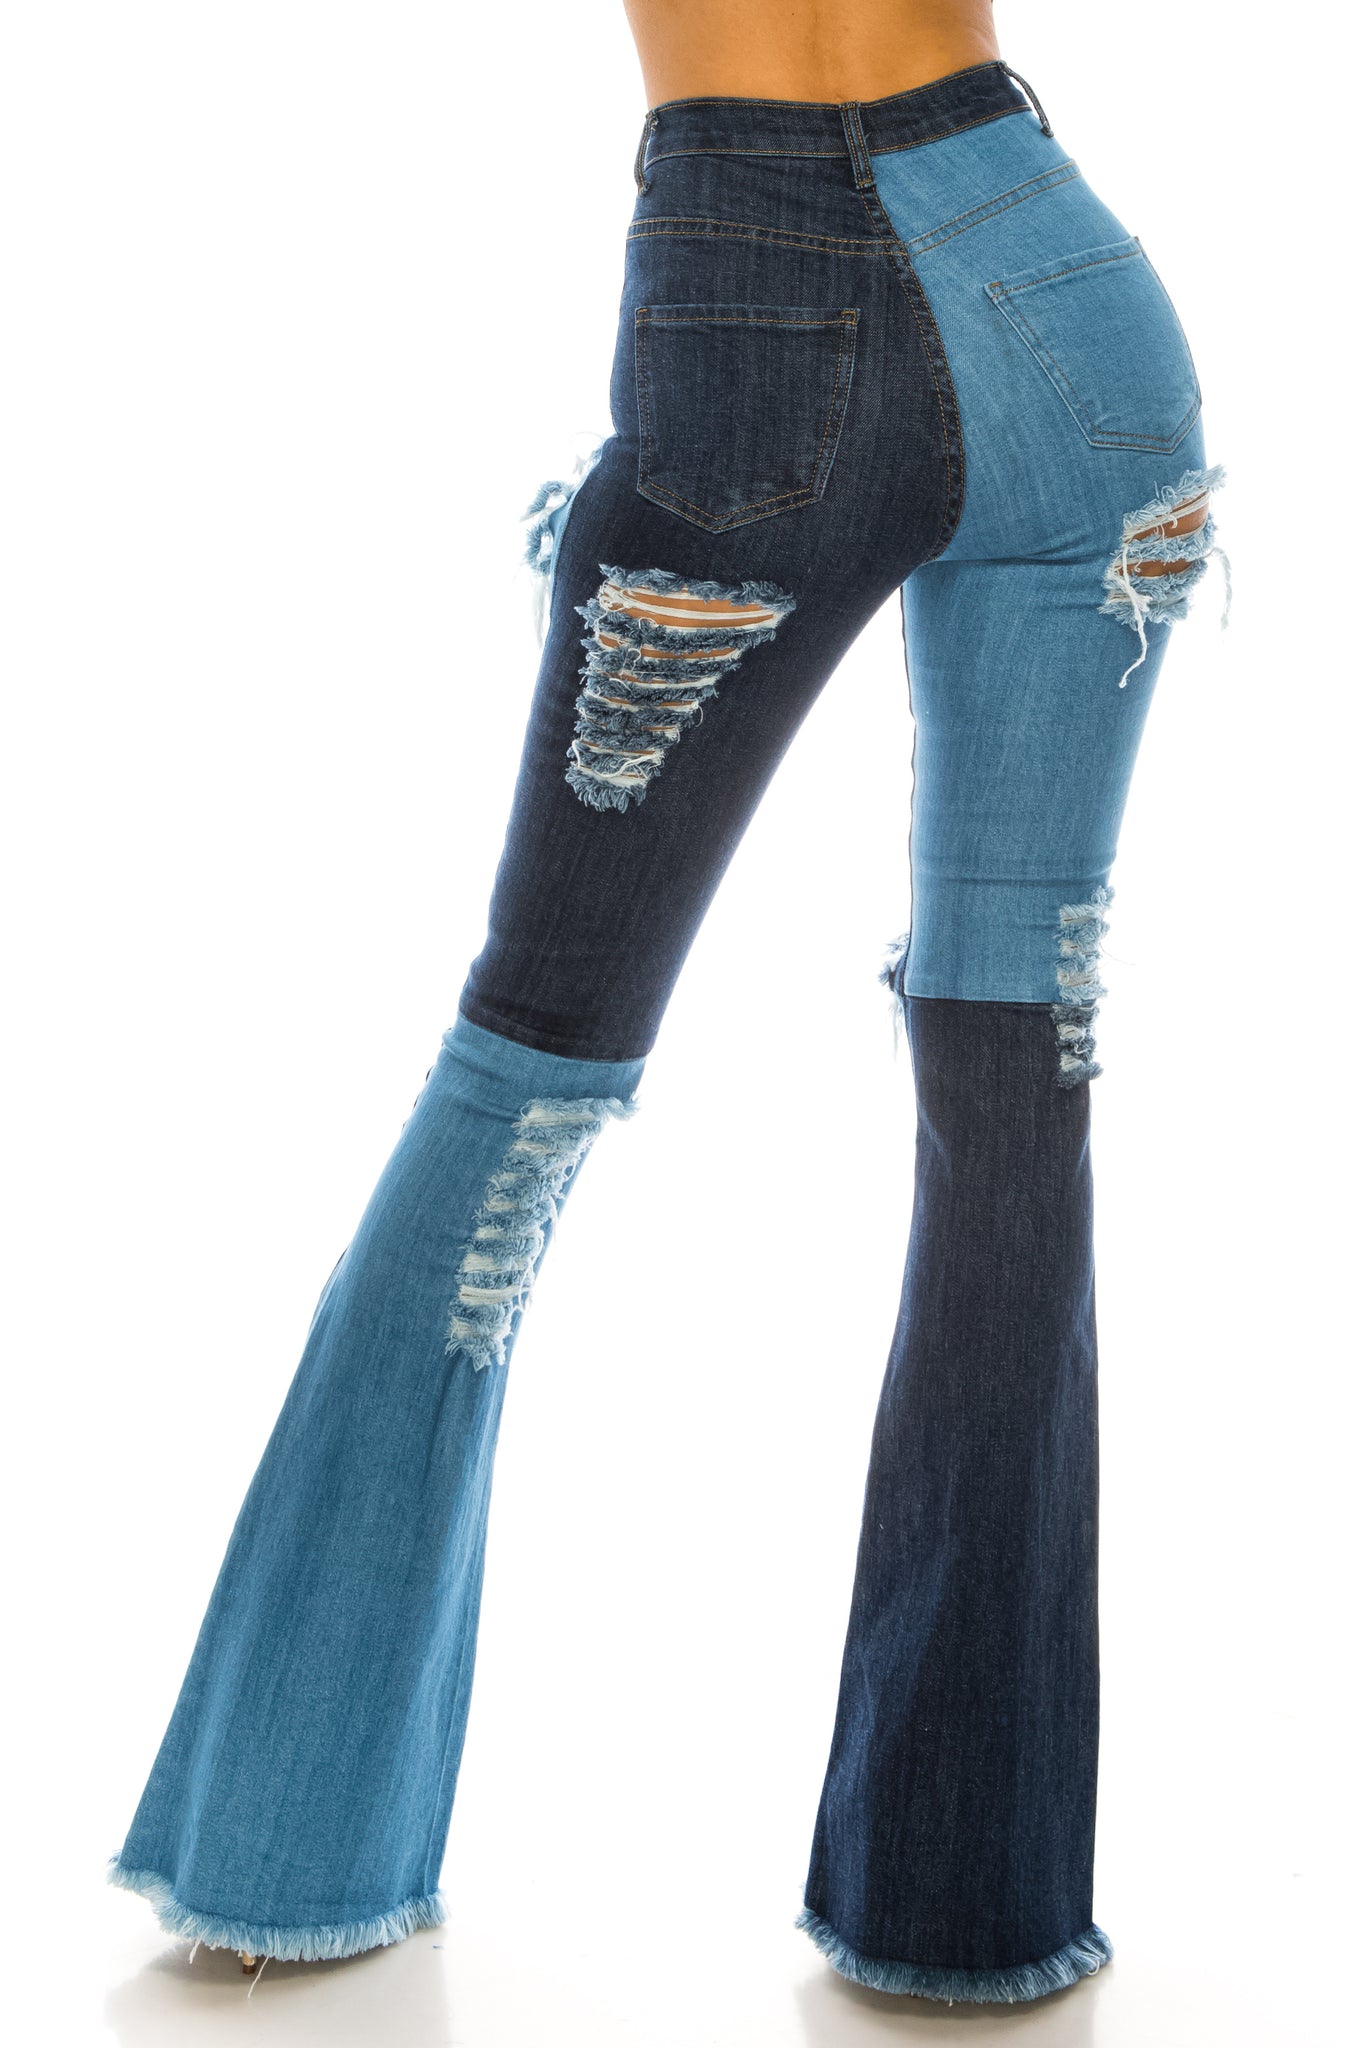 2132 Women's High Waisted Distressed Flare Jeans with Alternating Shade